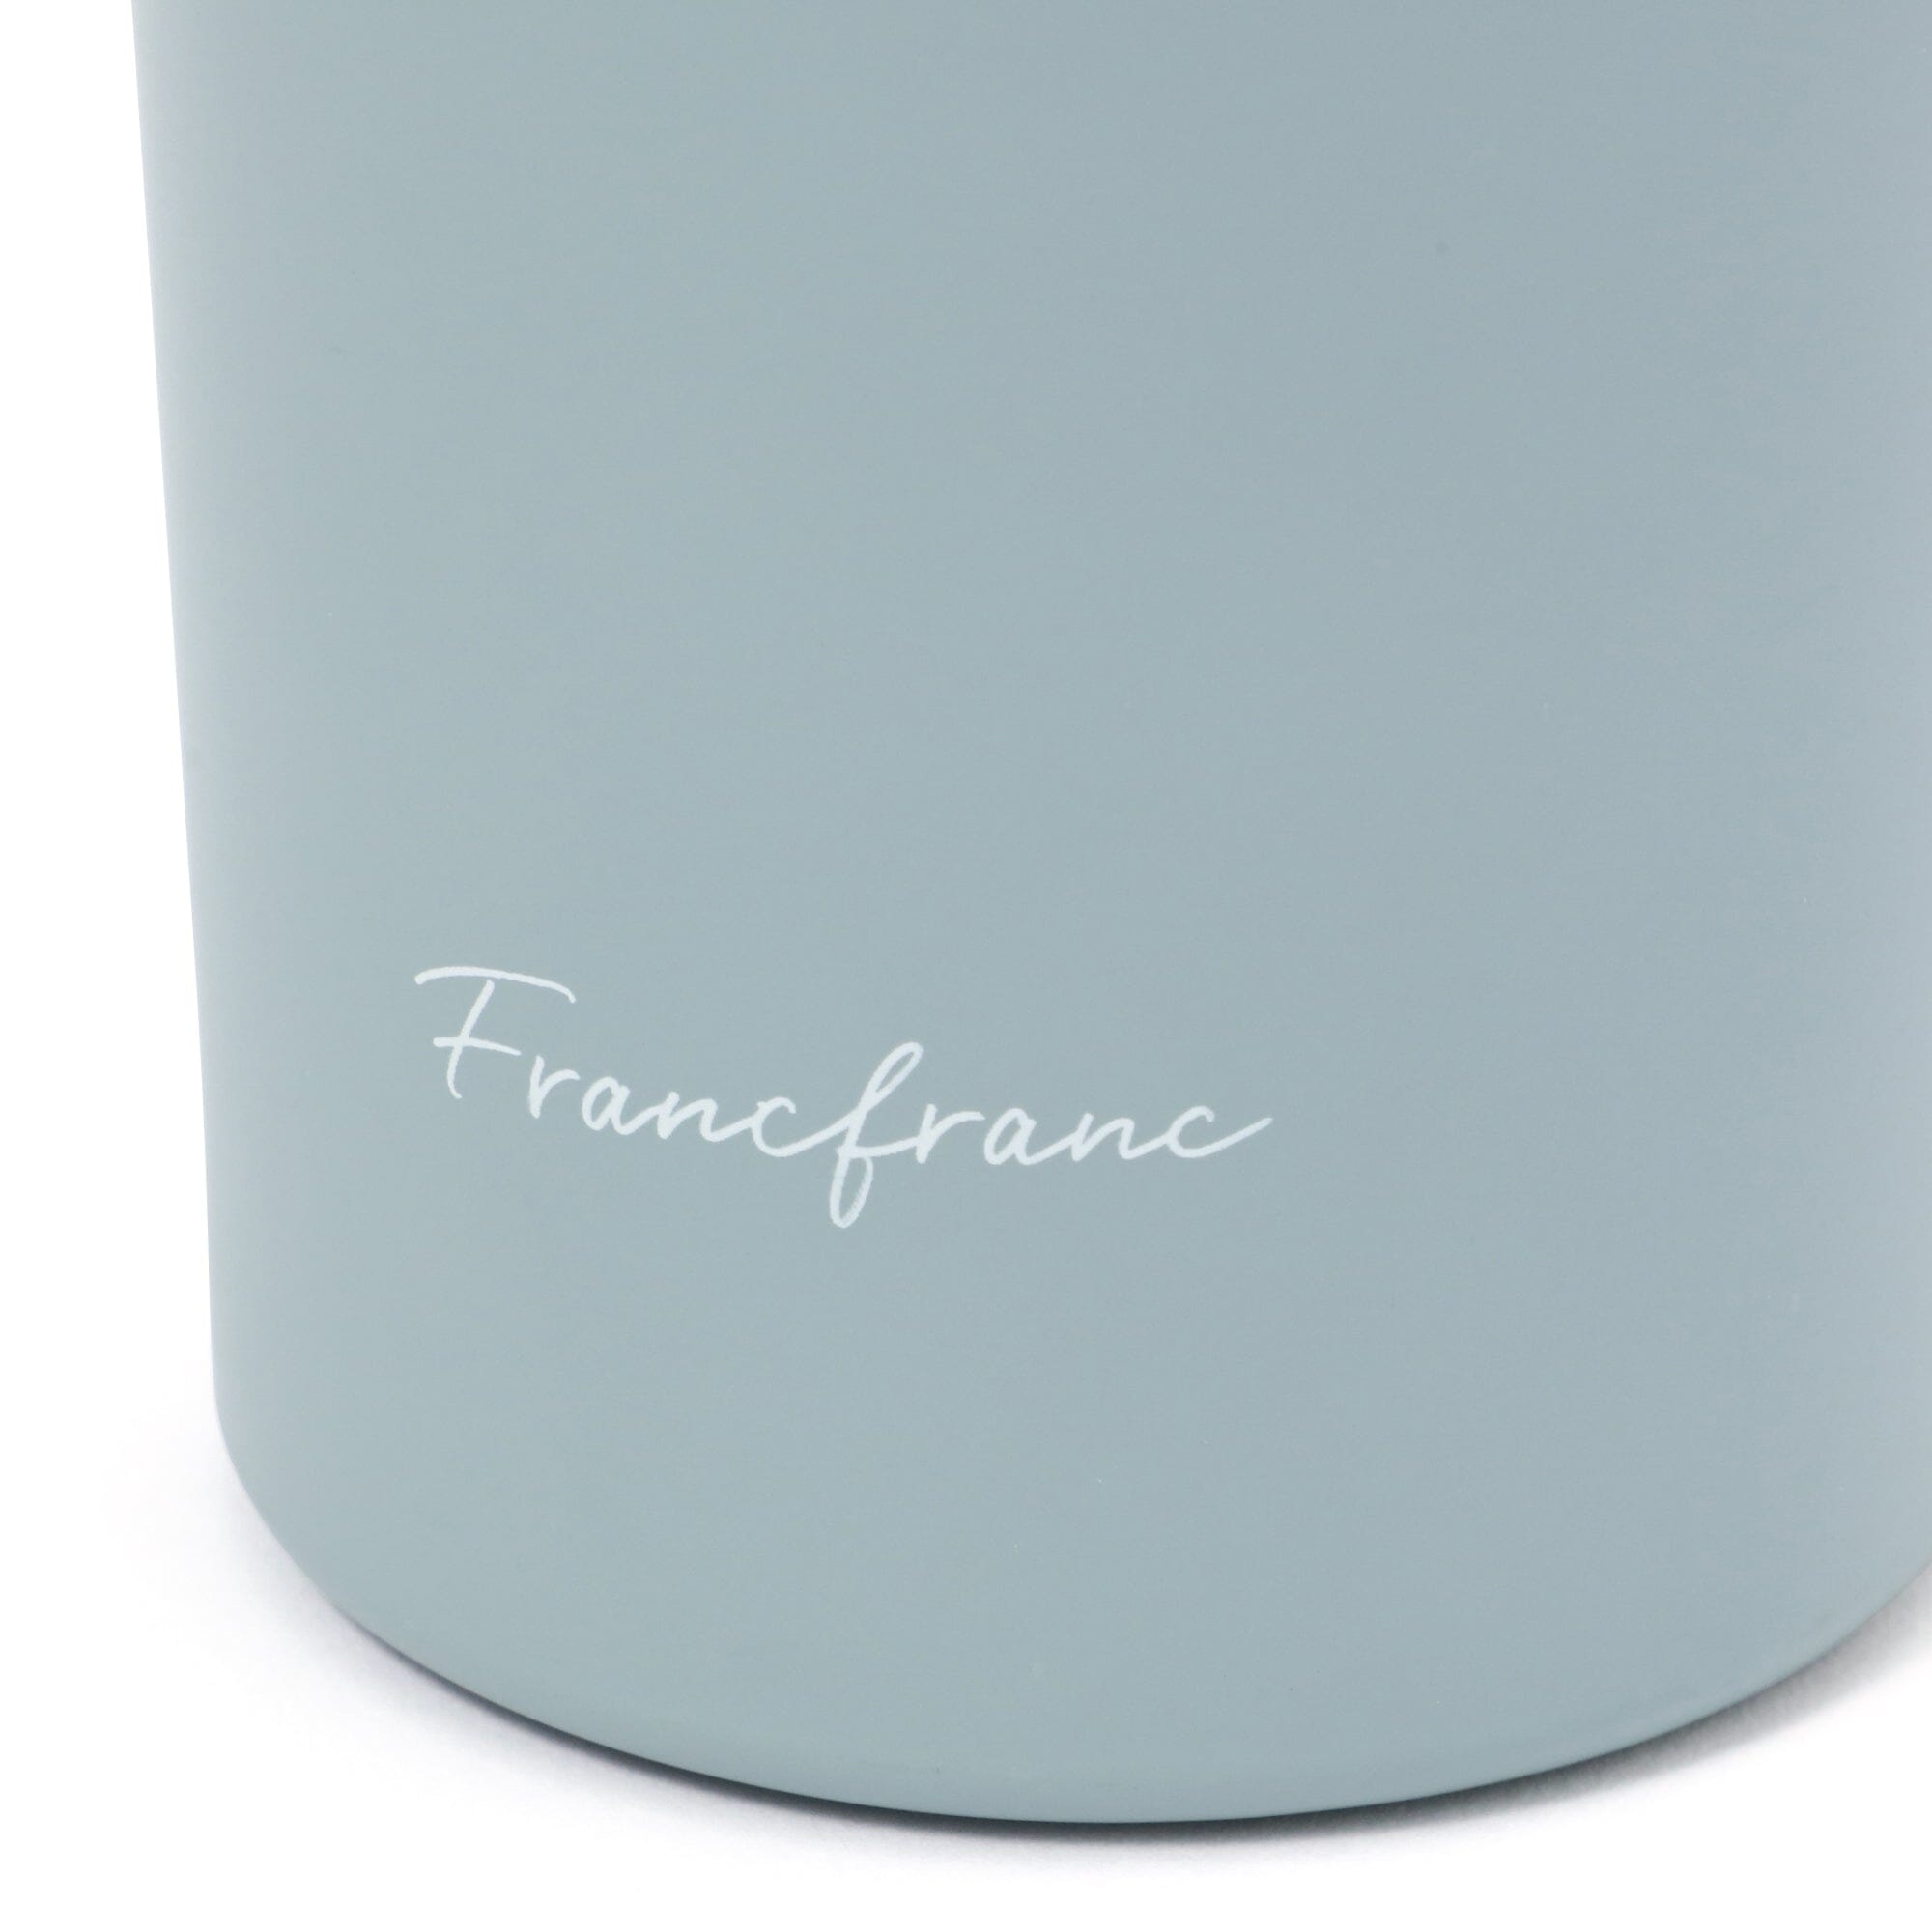 Stainless Steel Tumbler With Lid 650ml Blue